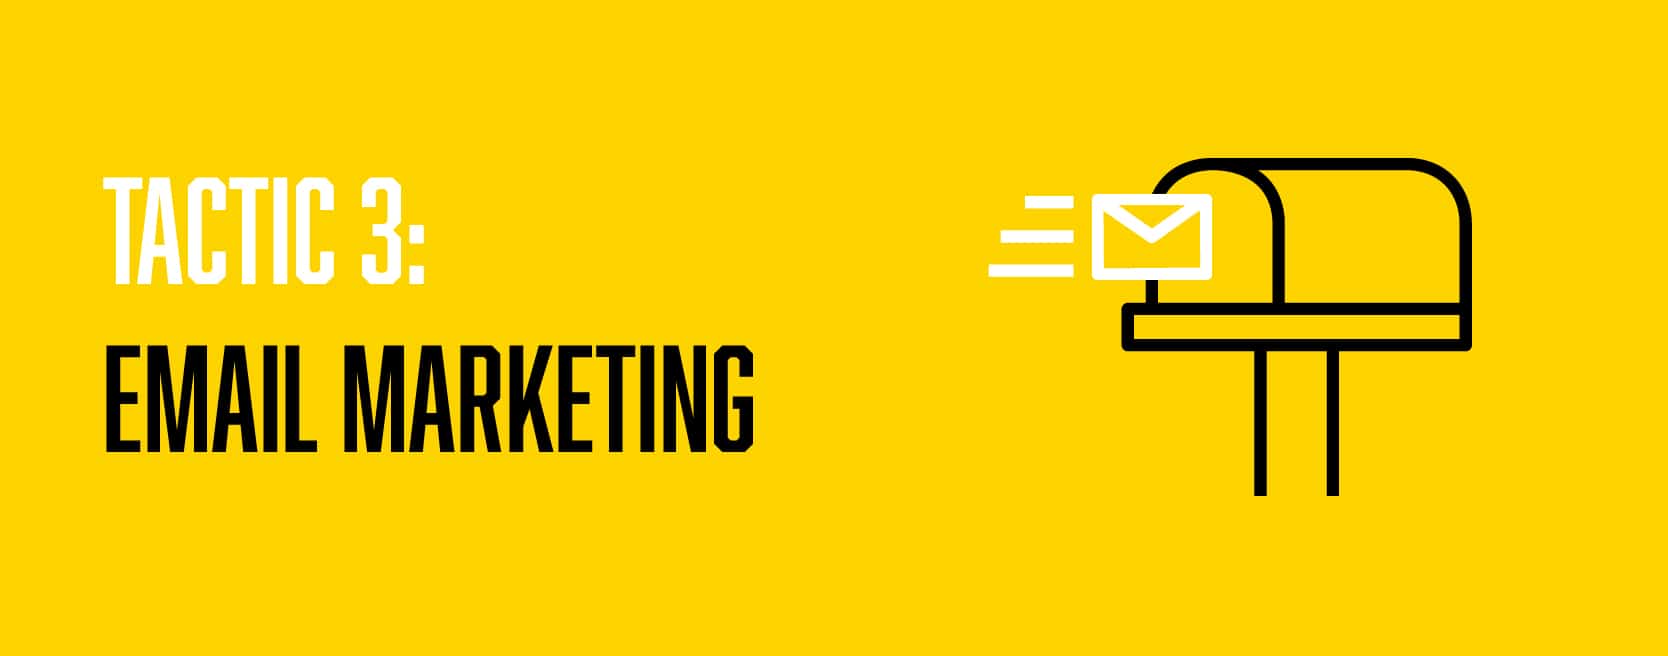 Email Marketing-02